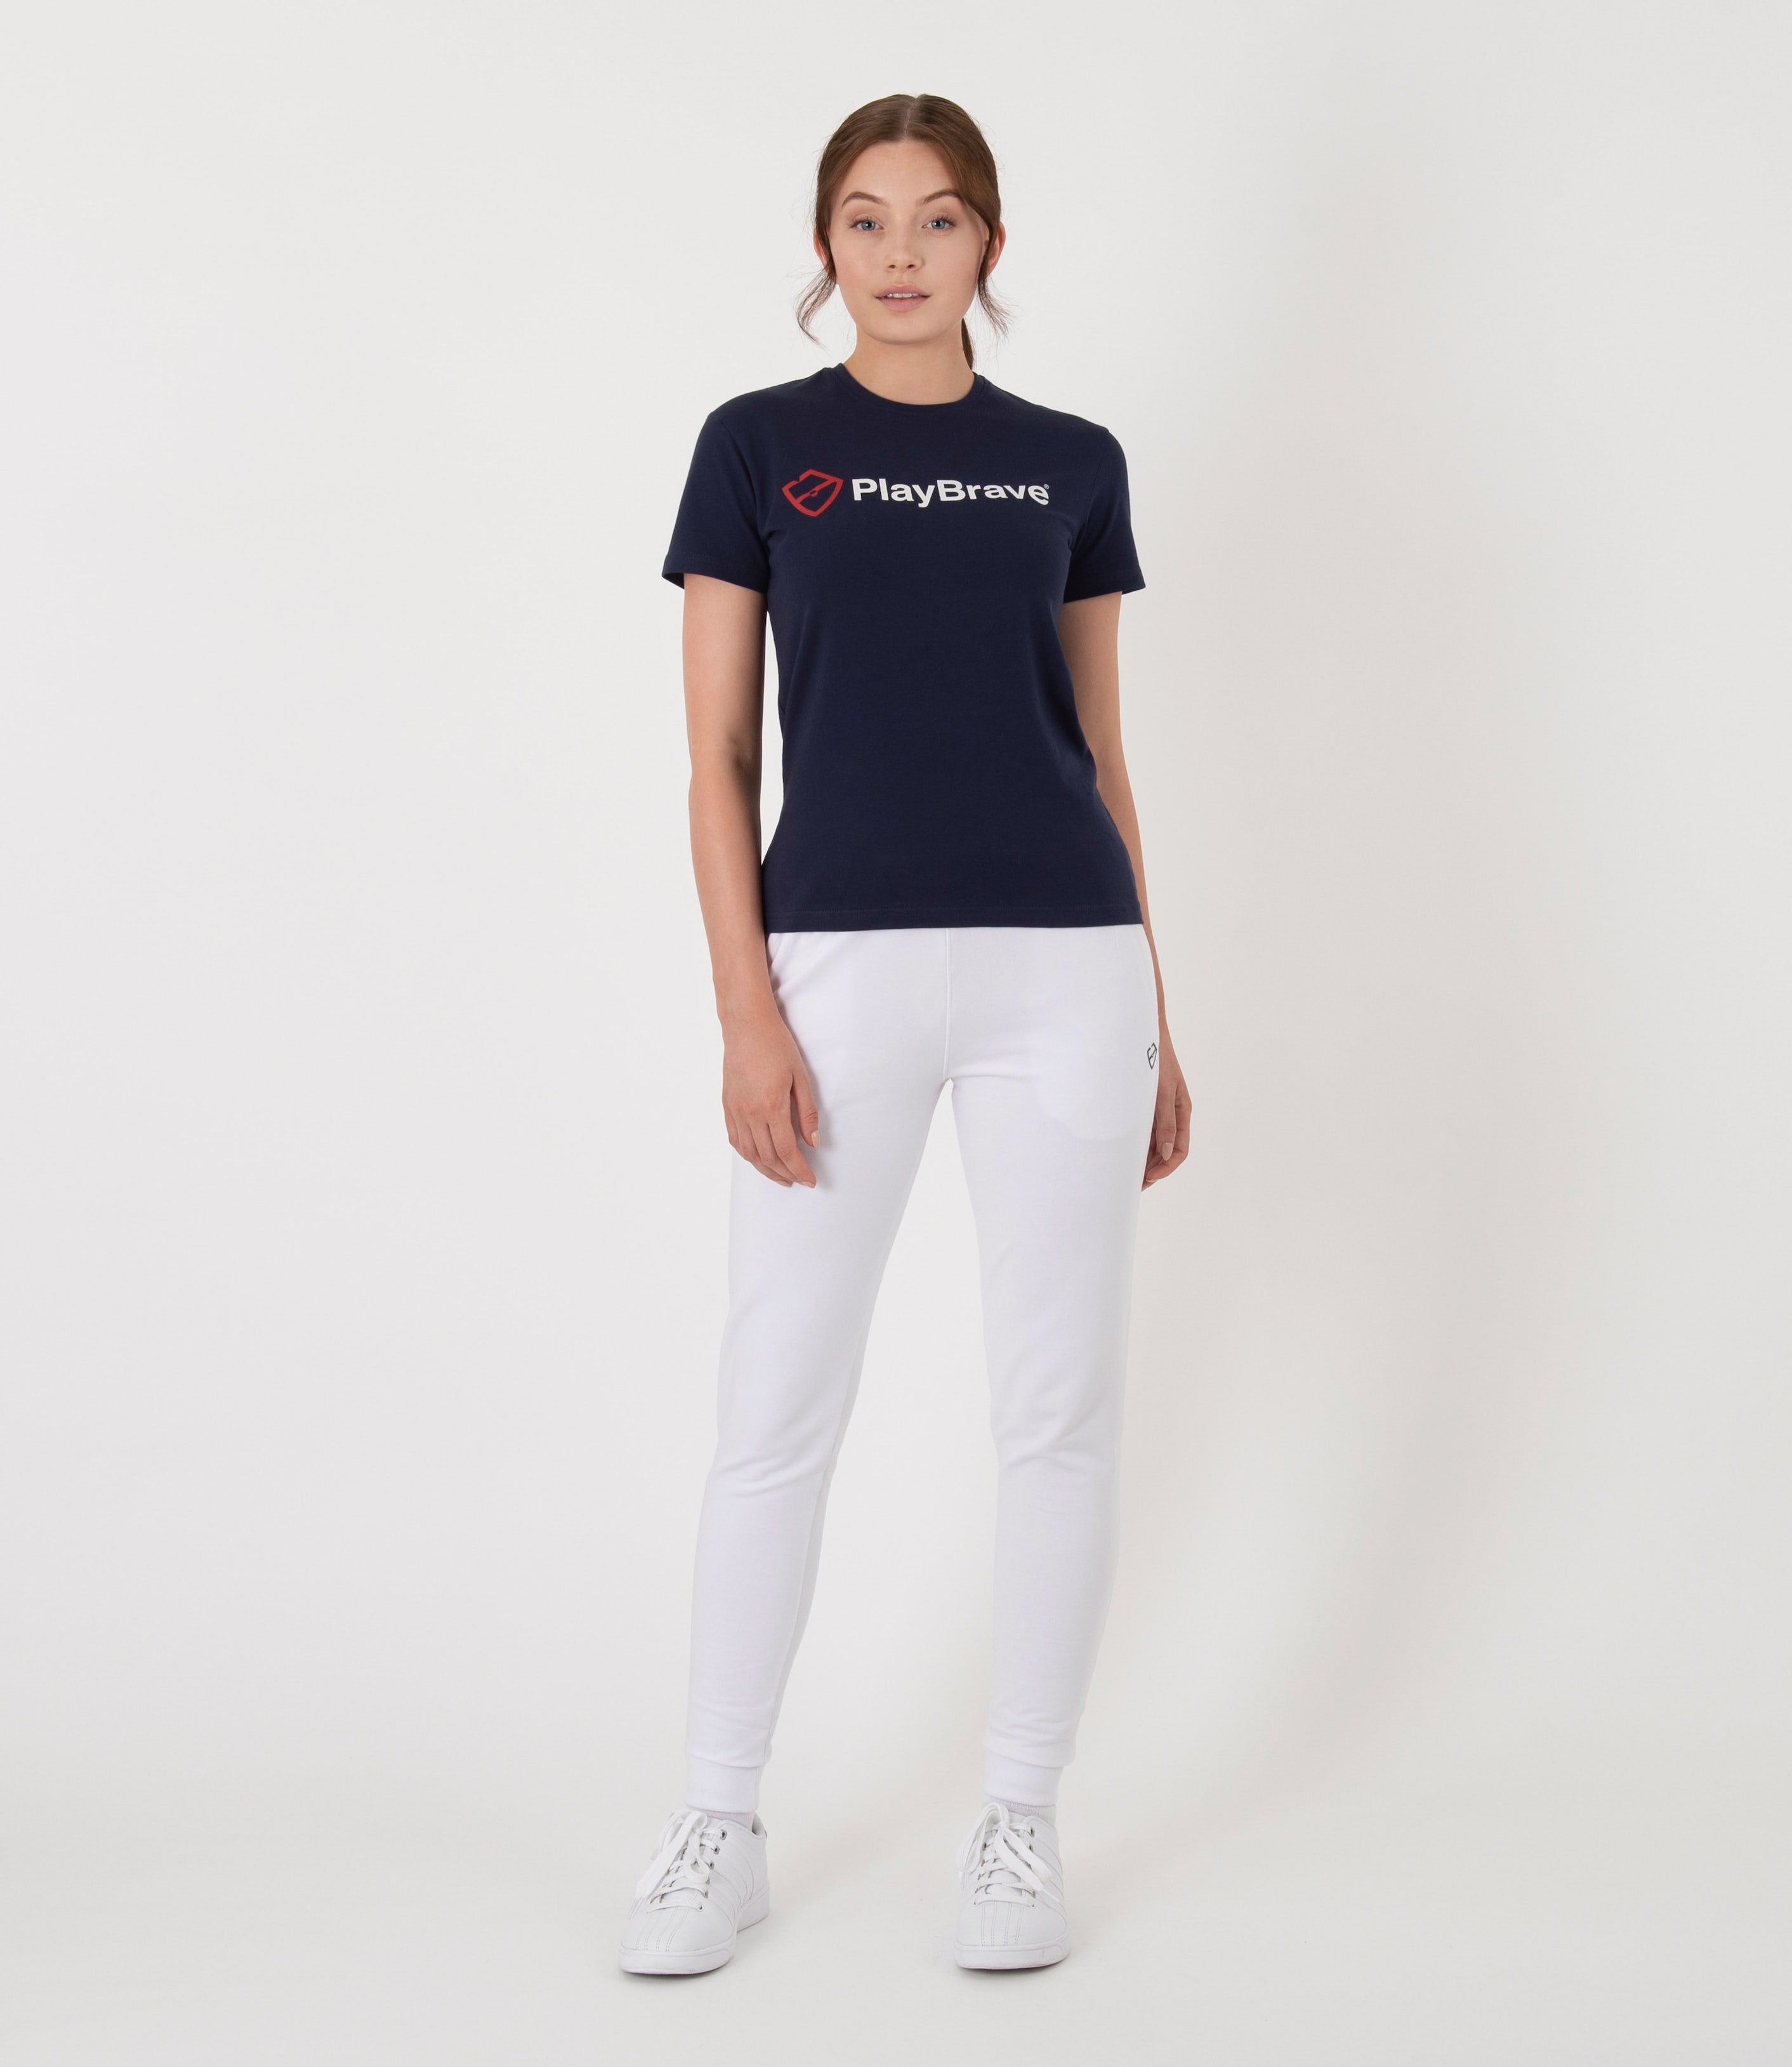 Sophie Cotton Tee - Navy/Red/White